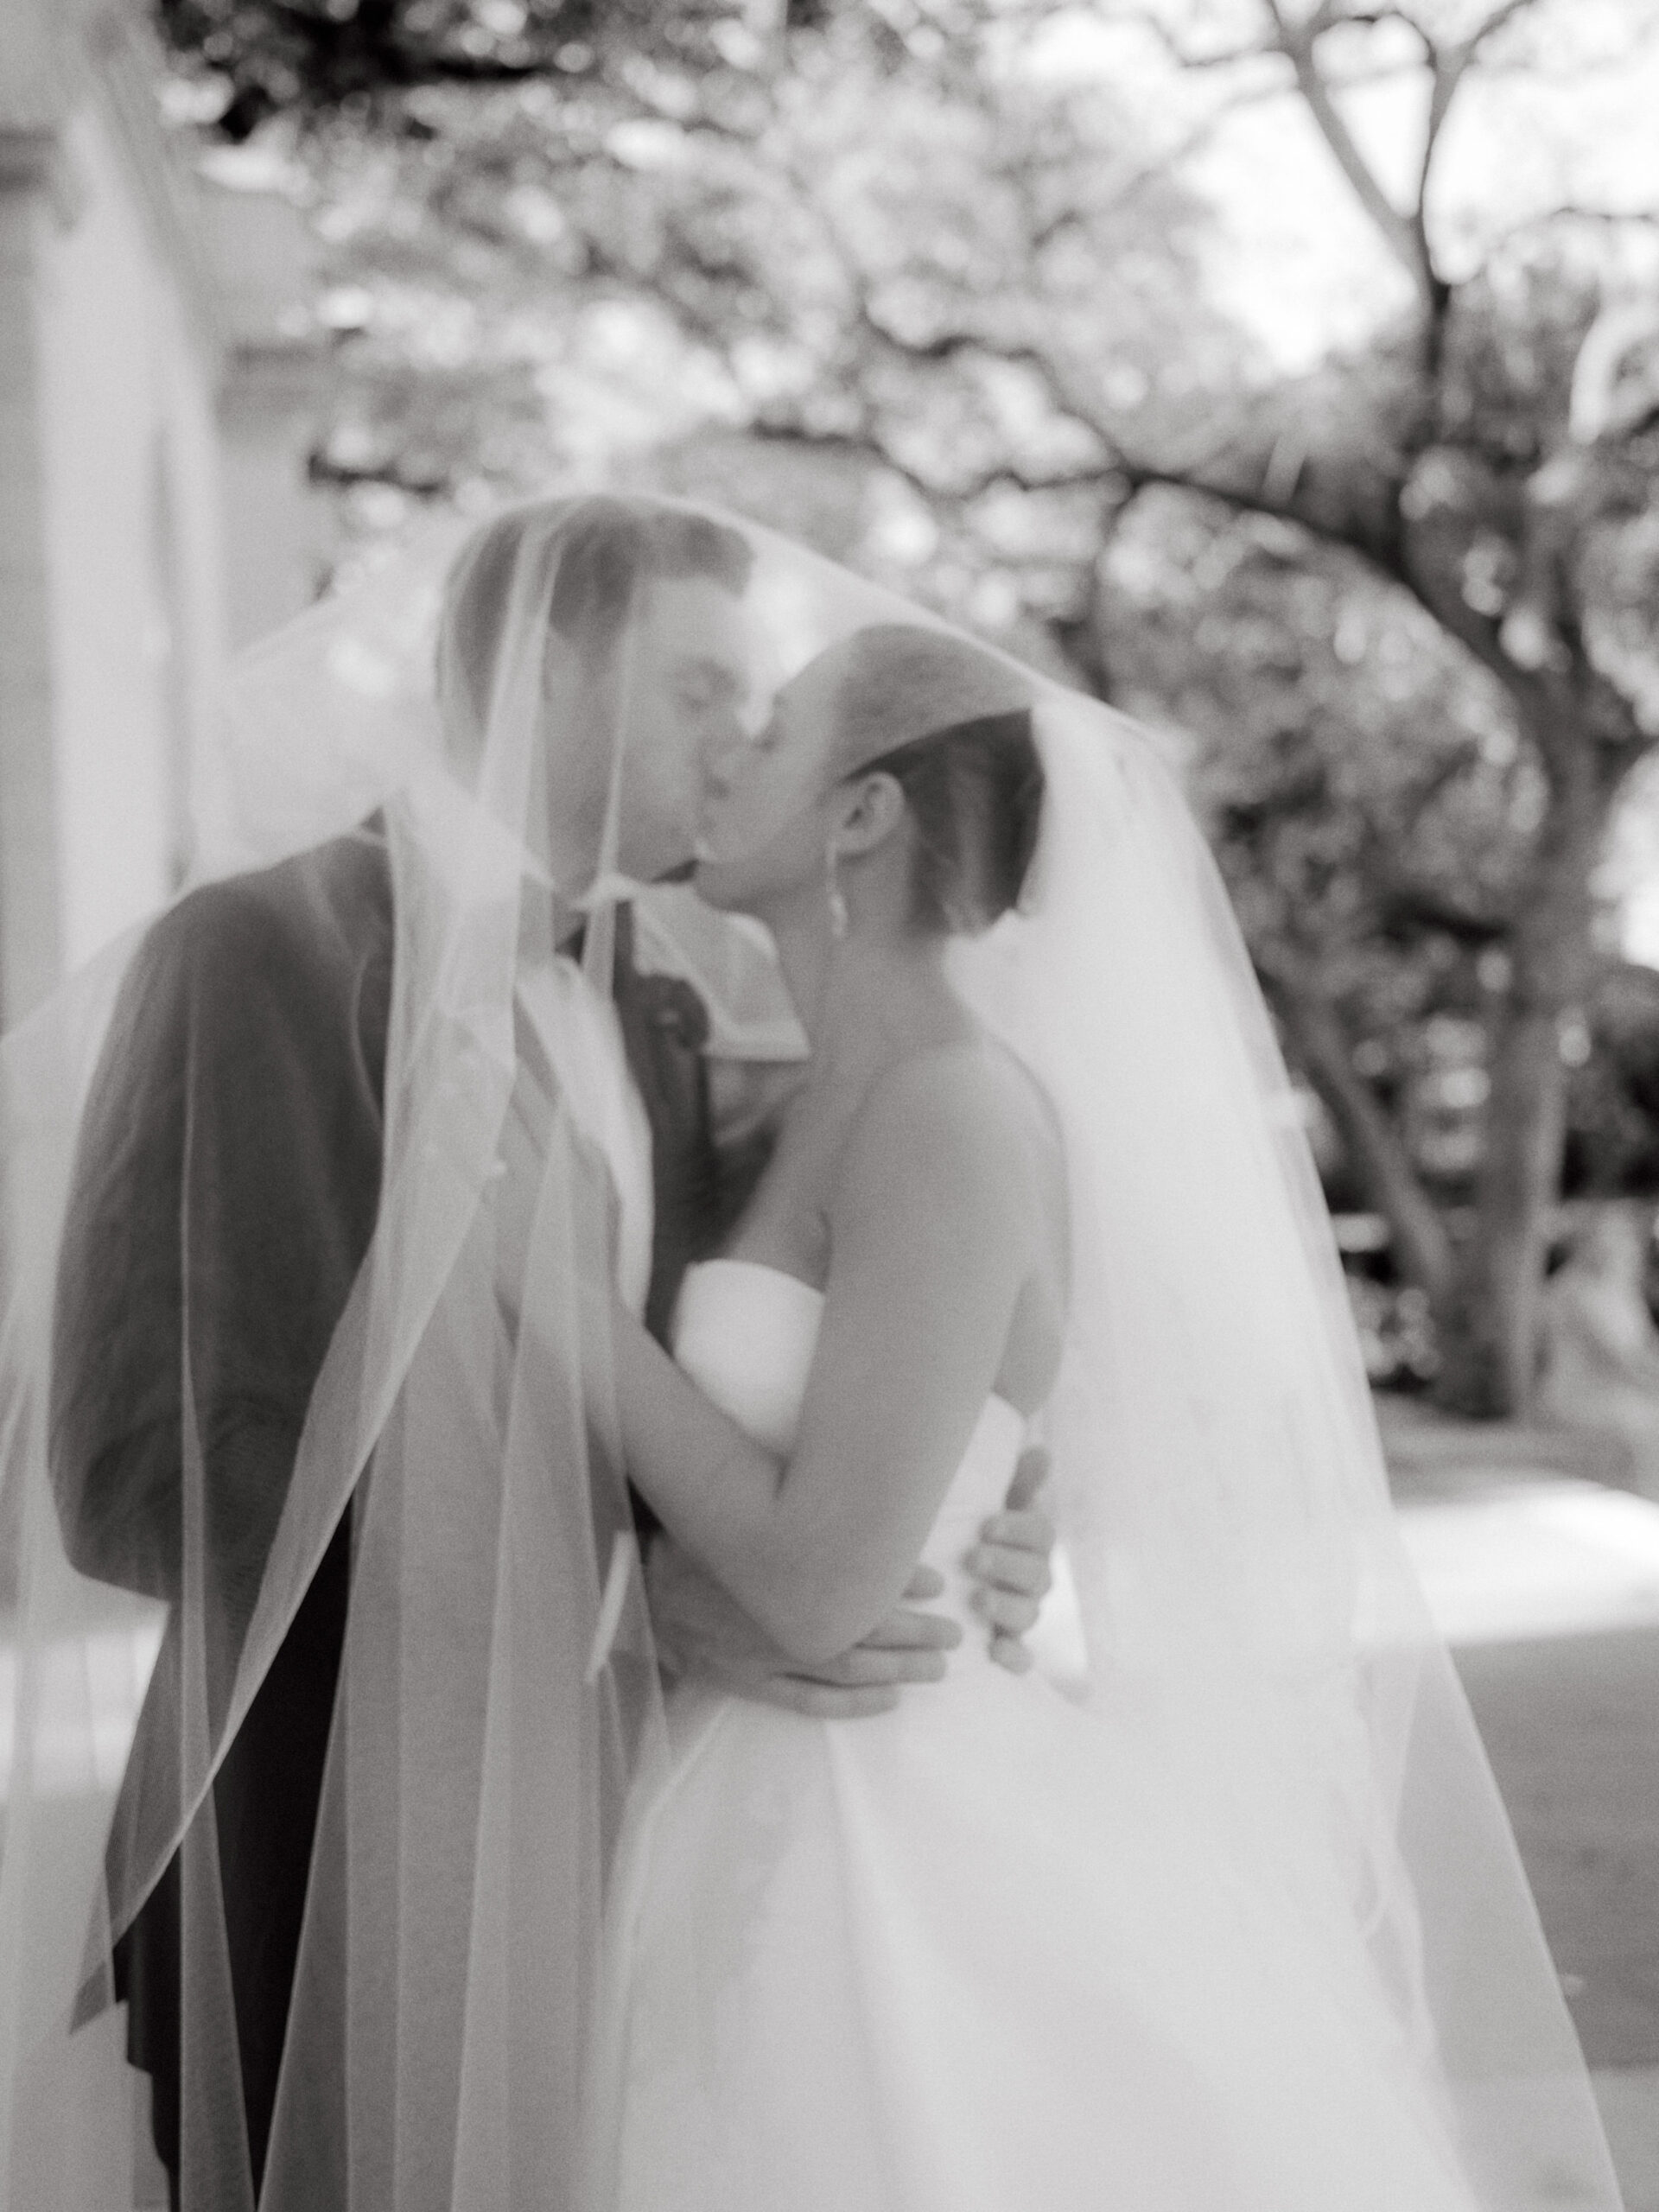 The newlyweds are kissing under the bride's veil. Image by Jenny Fu Studio